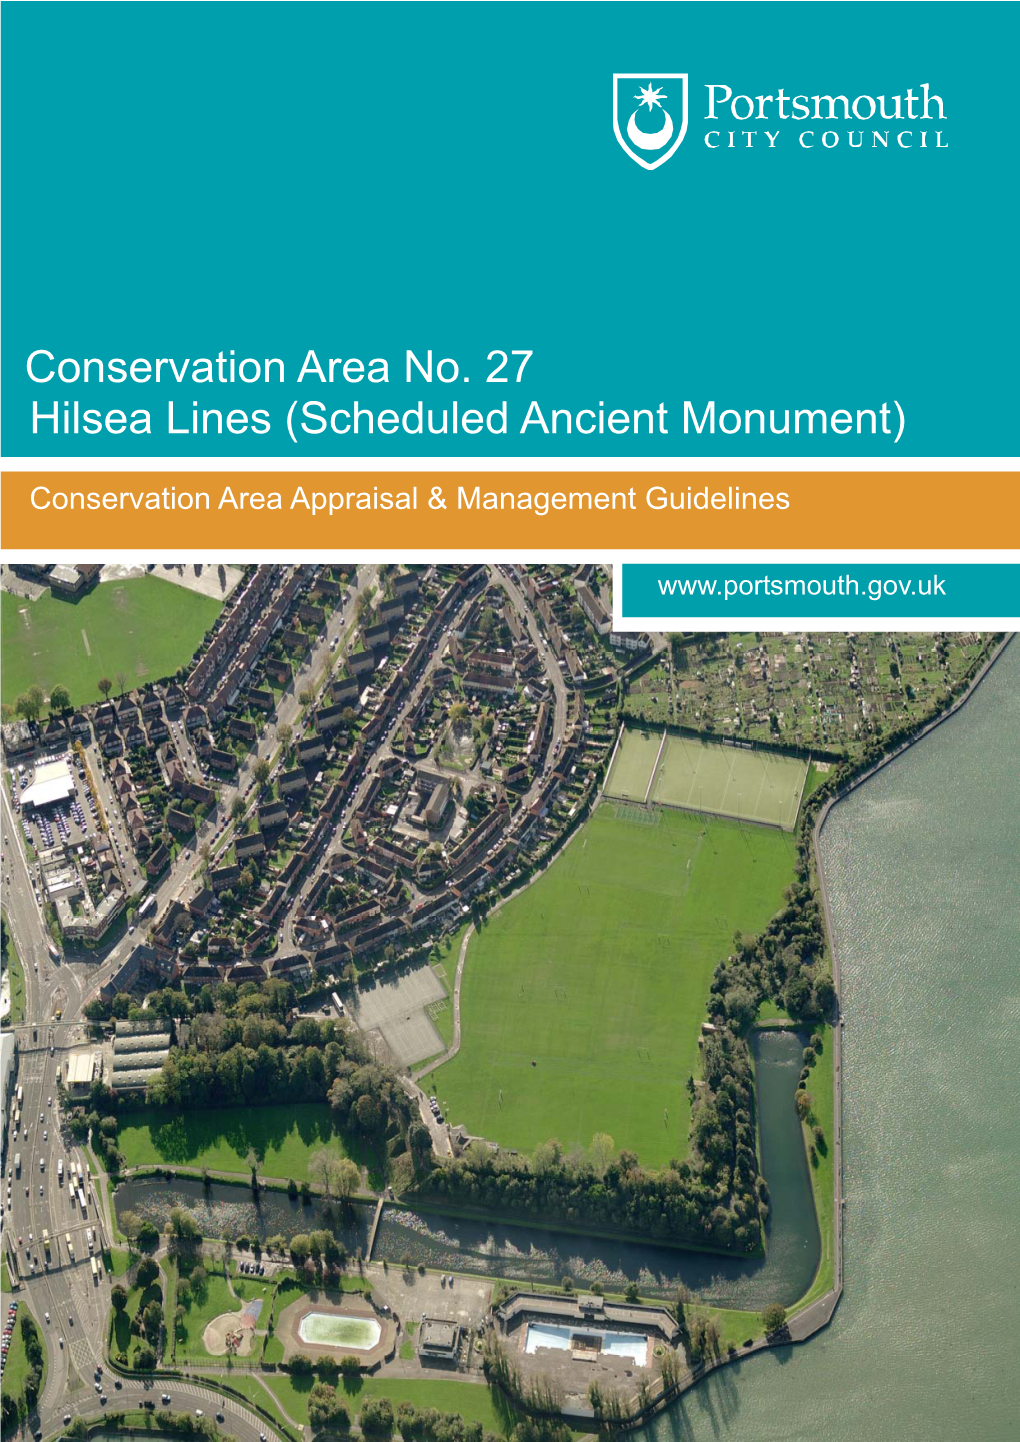 Conservation Area No. 27 Hilsea Lines (Scheduled Ancient Monument)